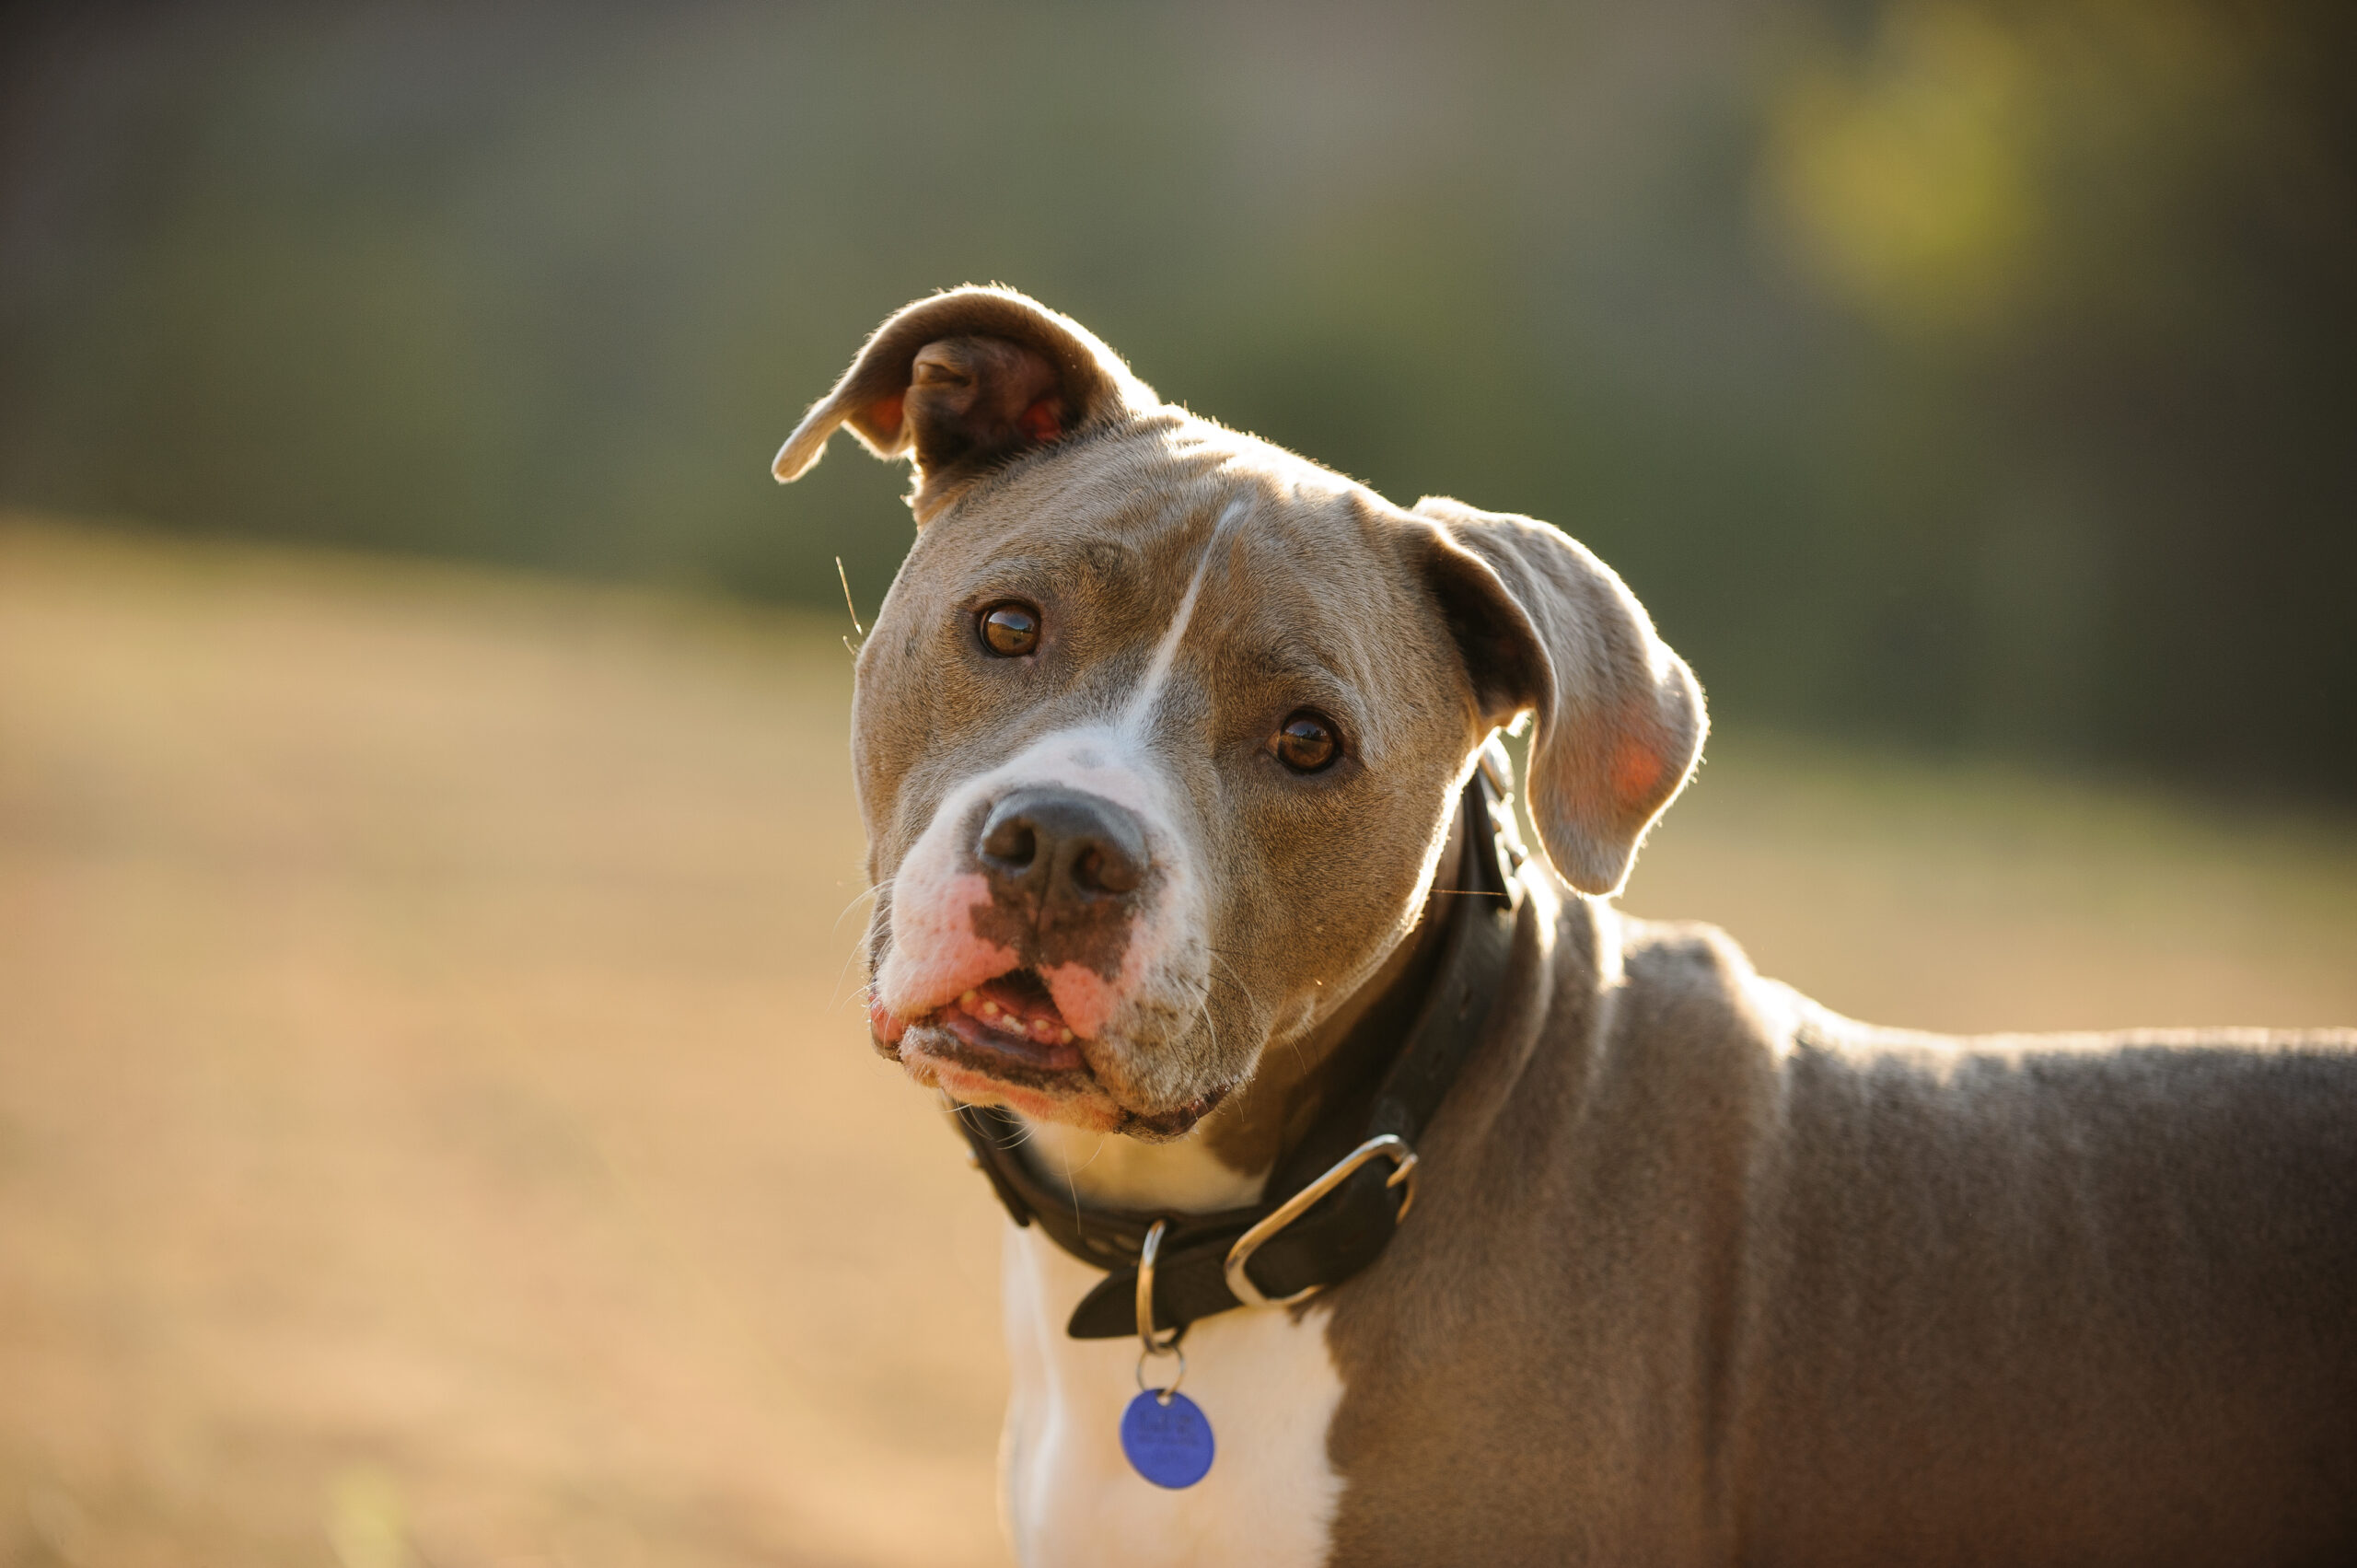 can you own a pitbull in the uk with a license?